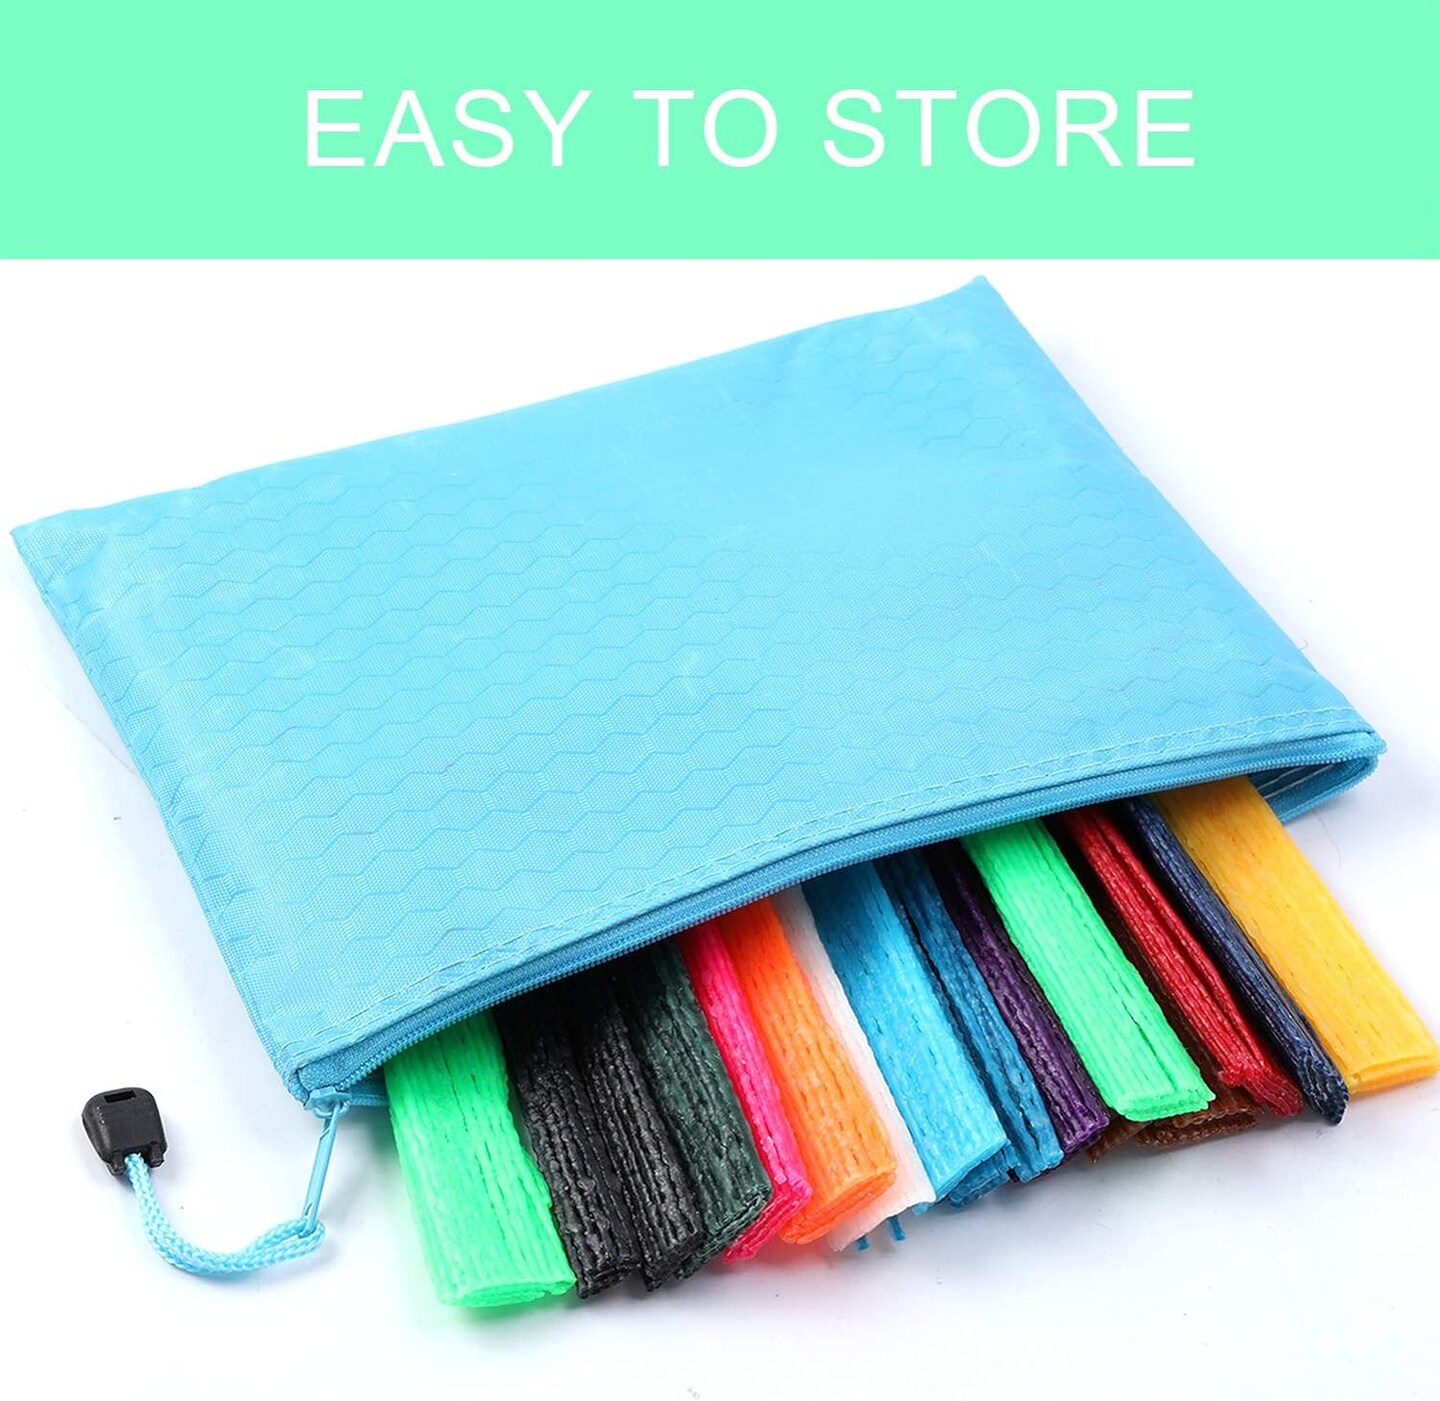 1000PCS Wax Craft Sticks Bendable Sticky Wax Yarn Sticks in 13 Colors with Blue Storage Bag for Kids DIY Art Supplies